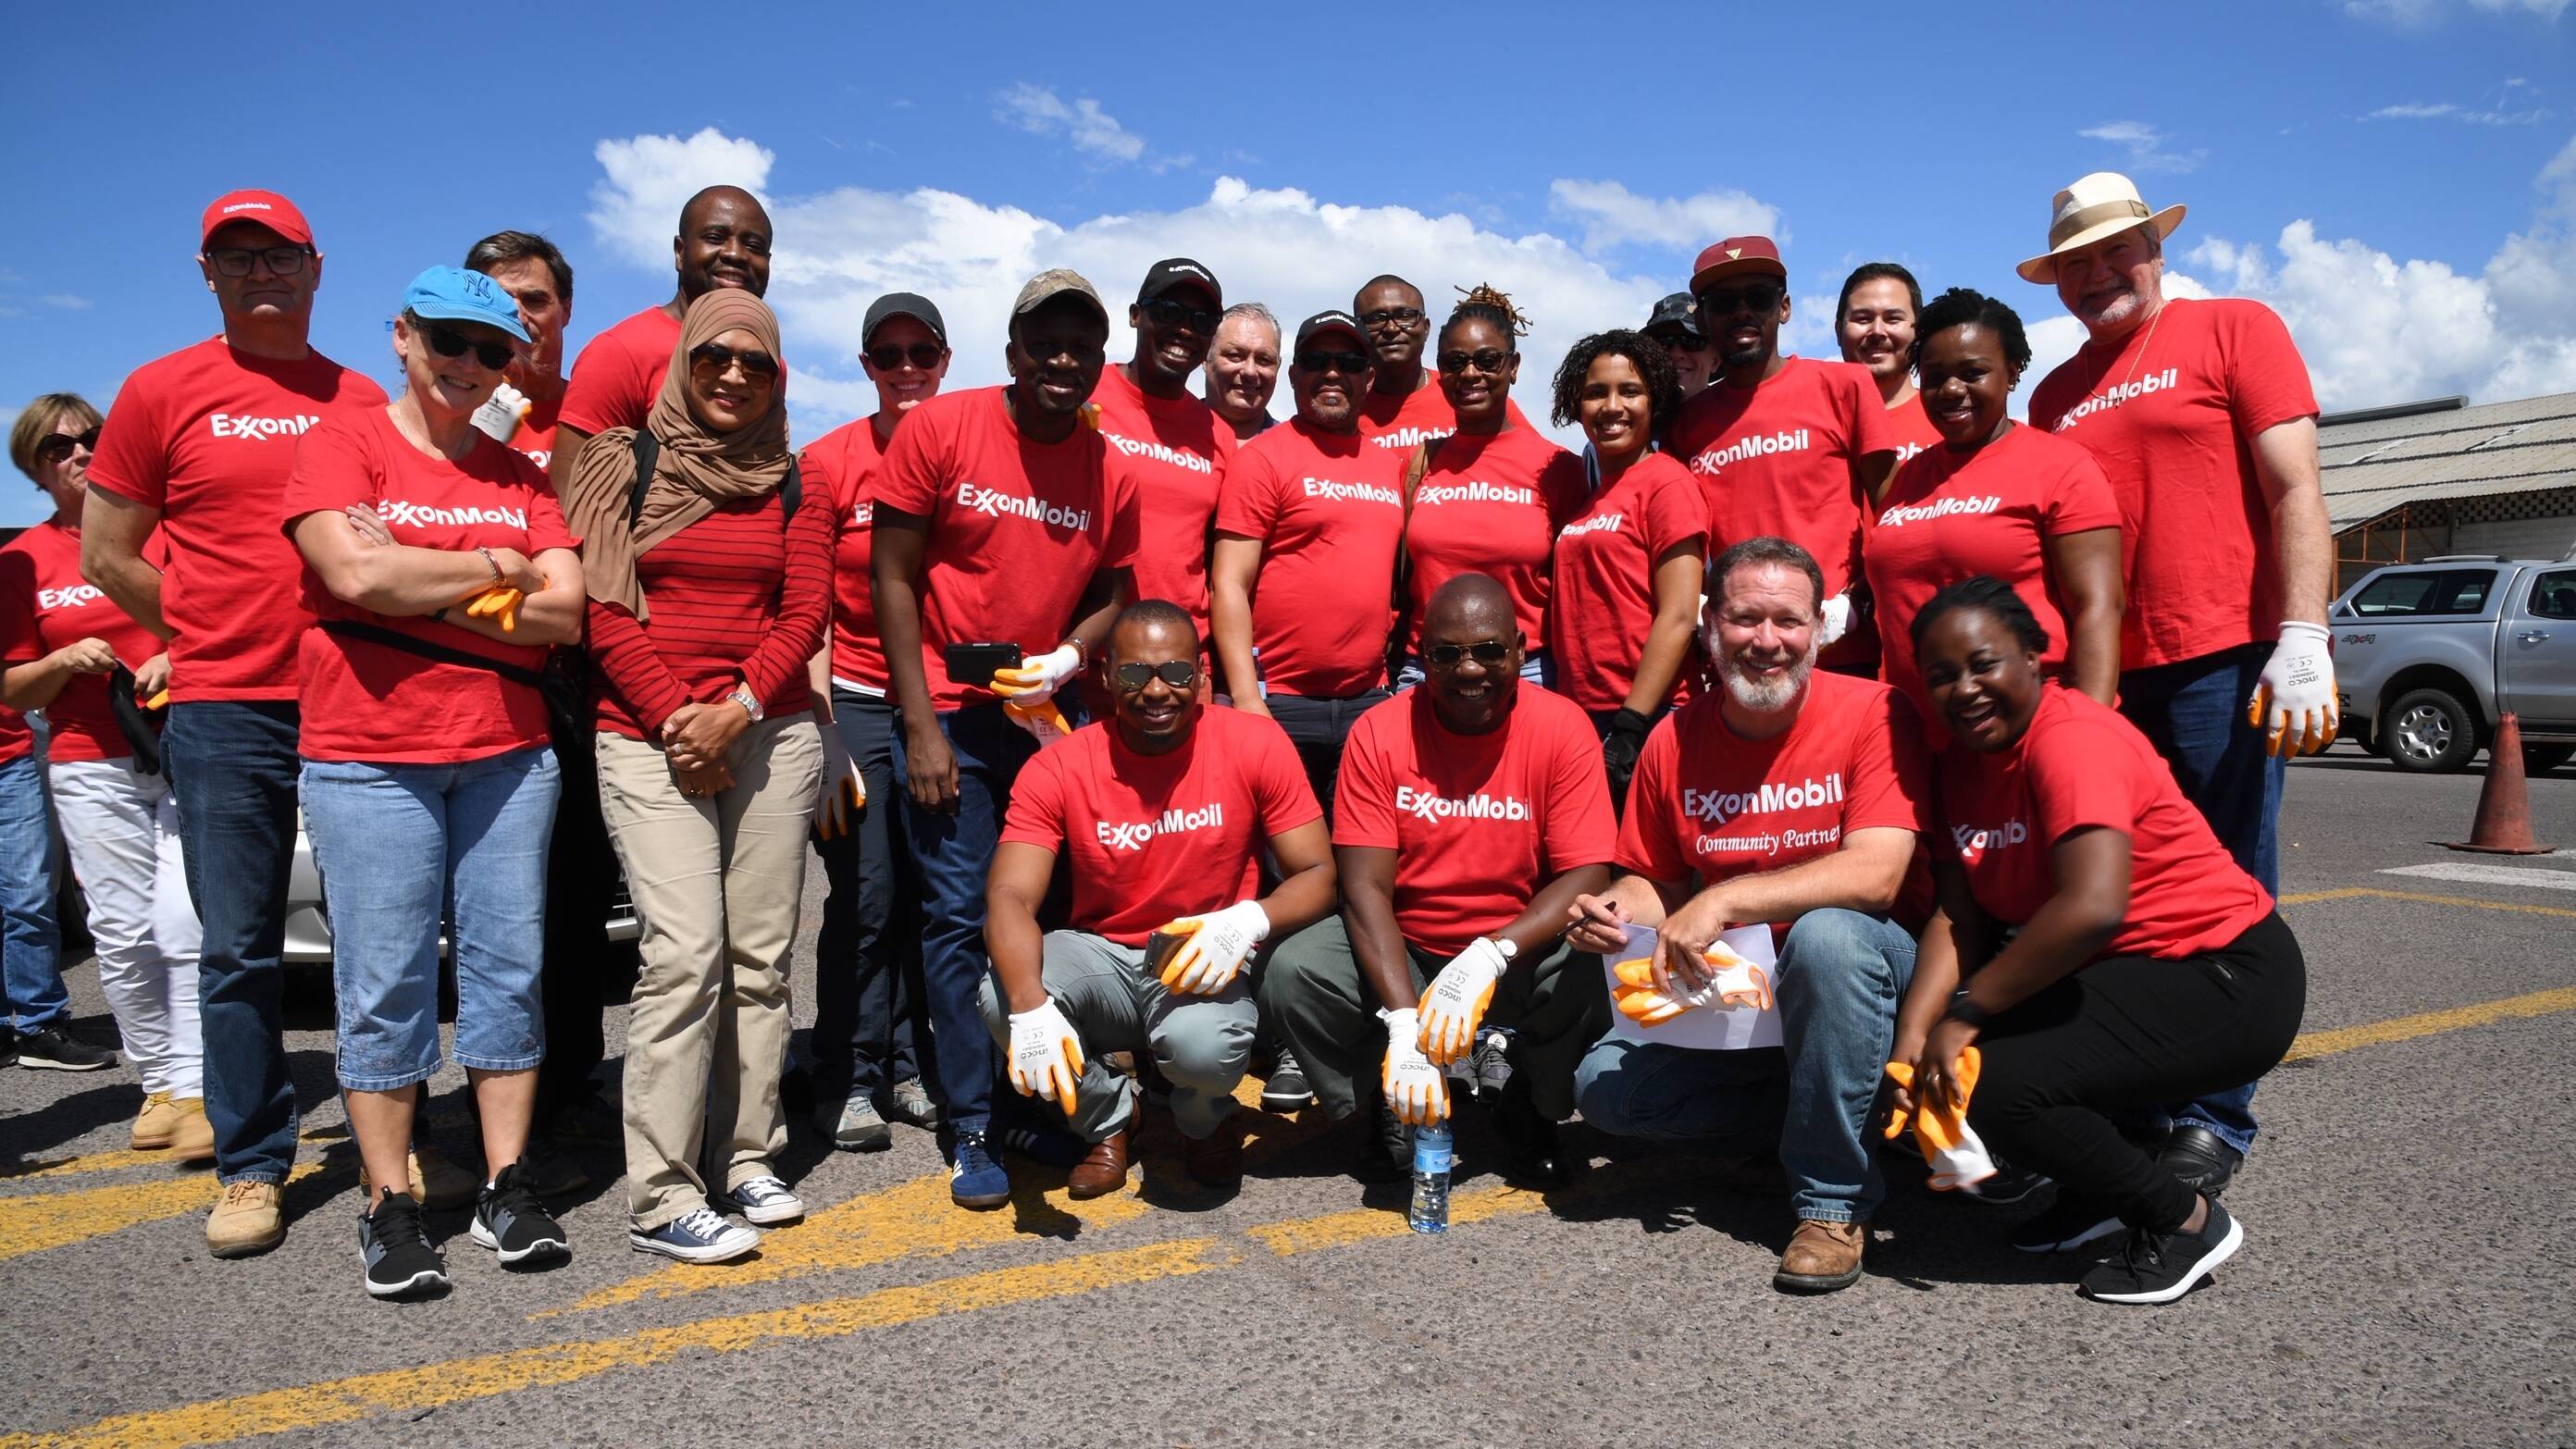 A group of ExxonMobil Mozambique employees volunteered more than 100 hours to assist in relief efforts in the days immediately following Cyclone Idai.